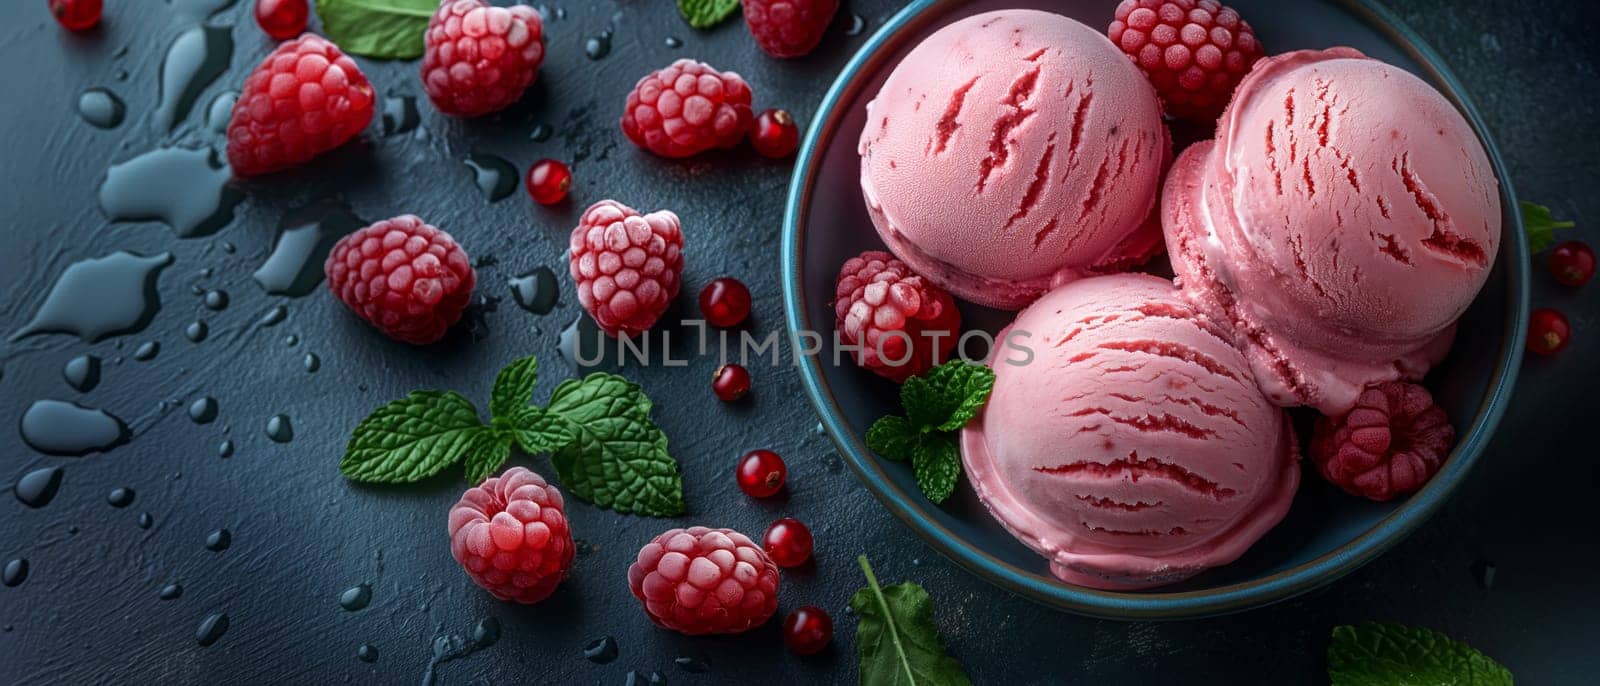 Ice cream with raspberries and blueberries. by Fischeron